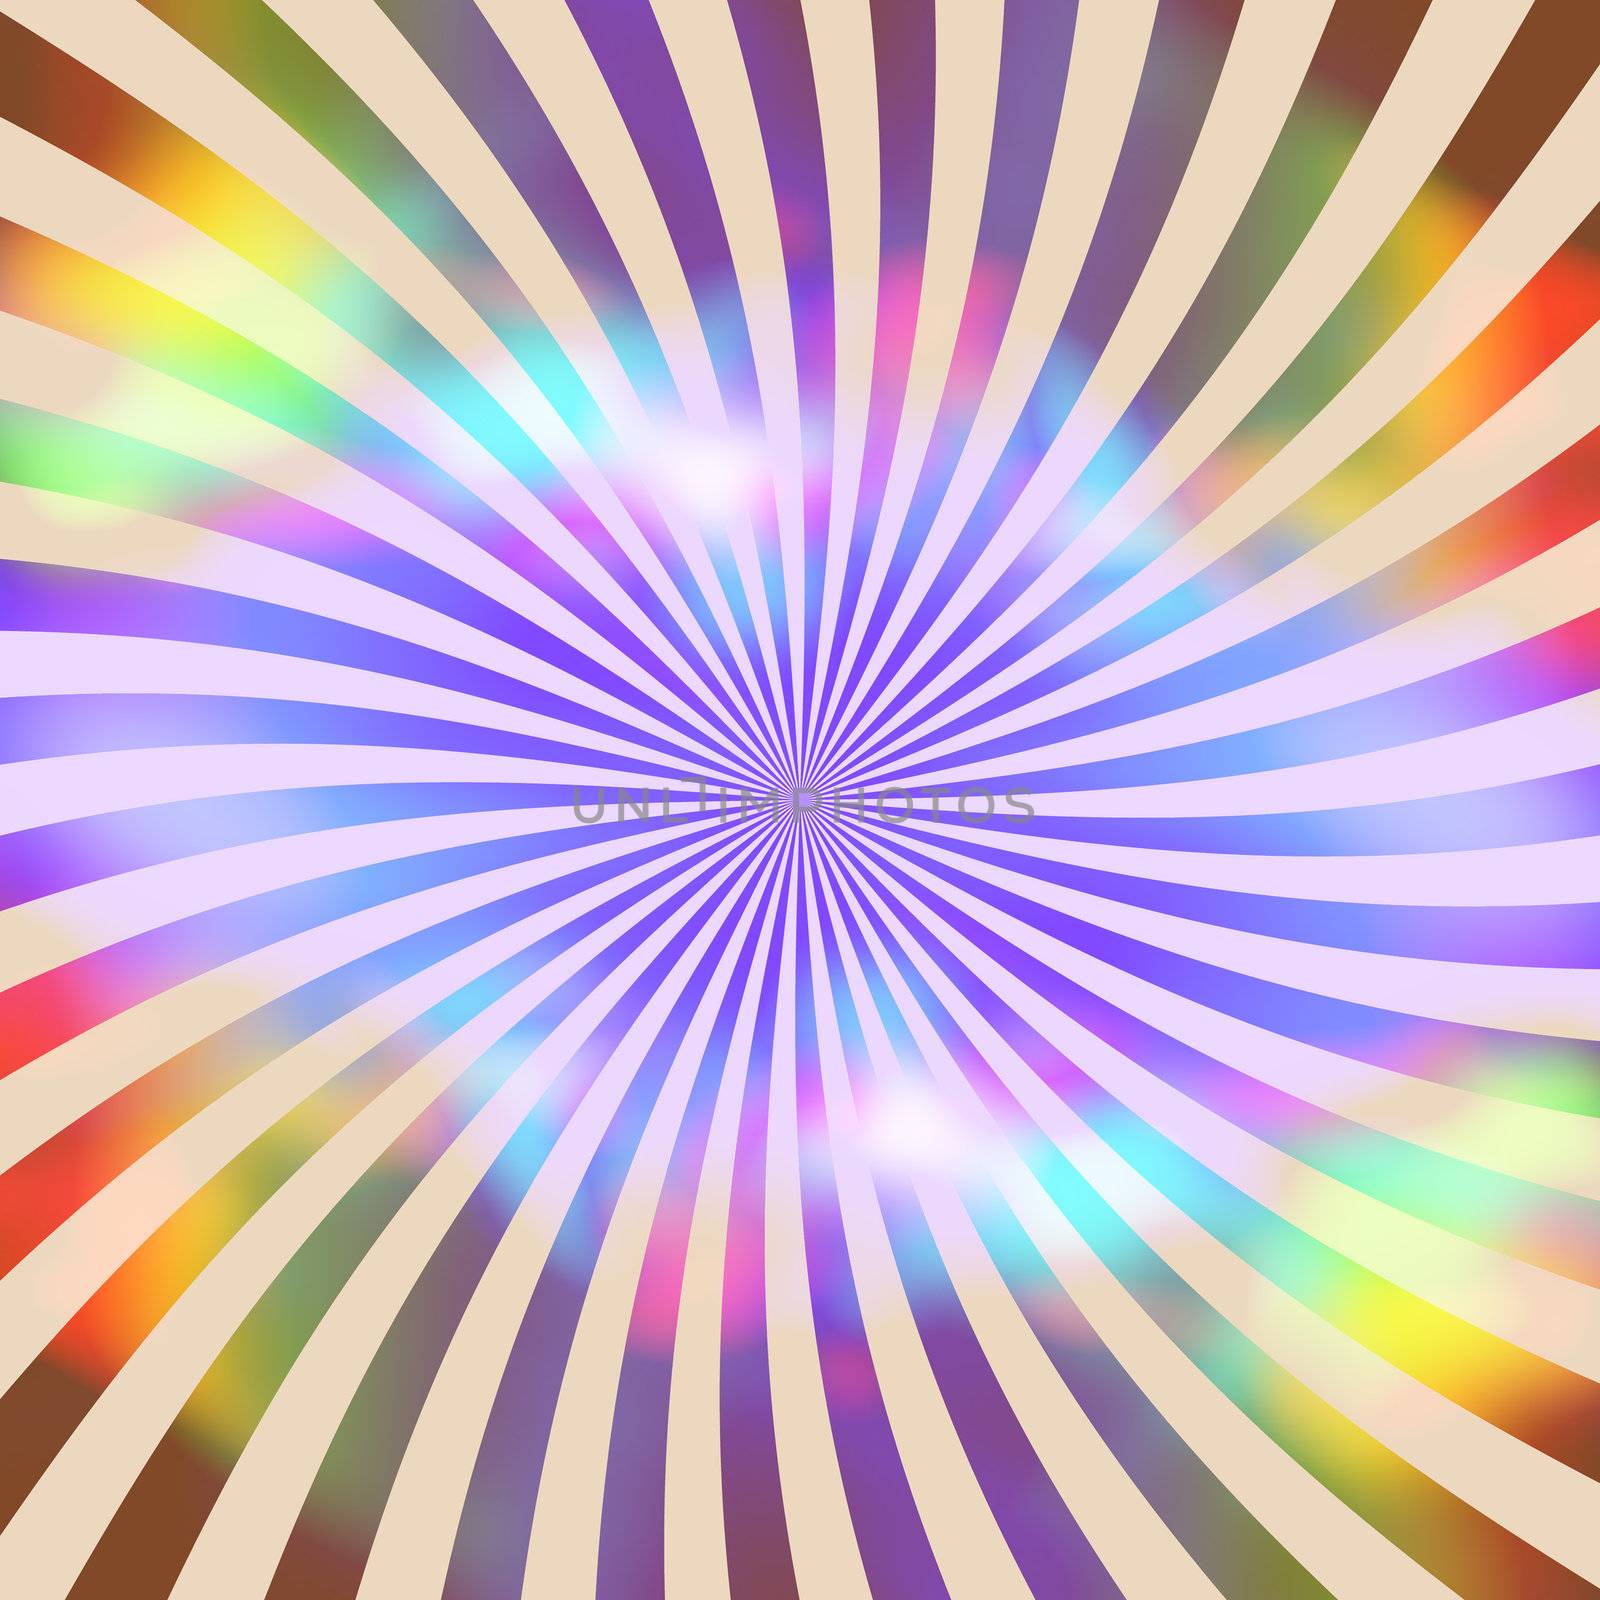 A retro or vintage looking rays pattern that works great as a background or backdrop.